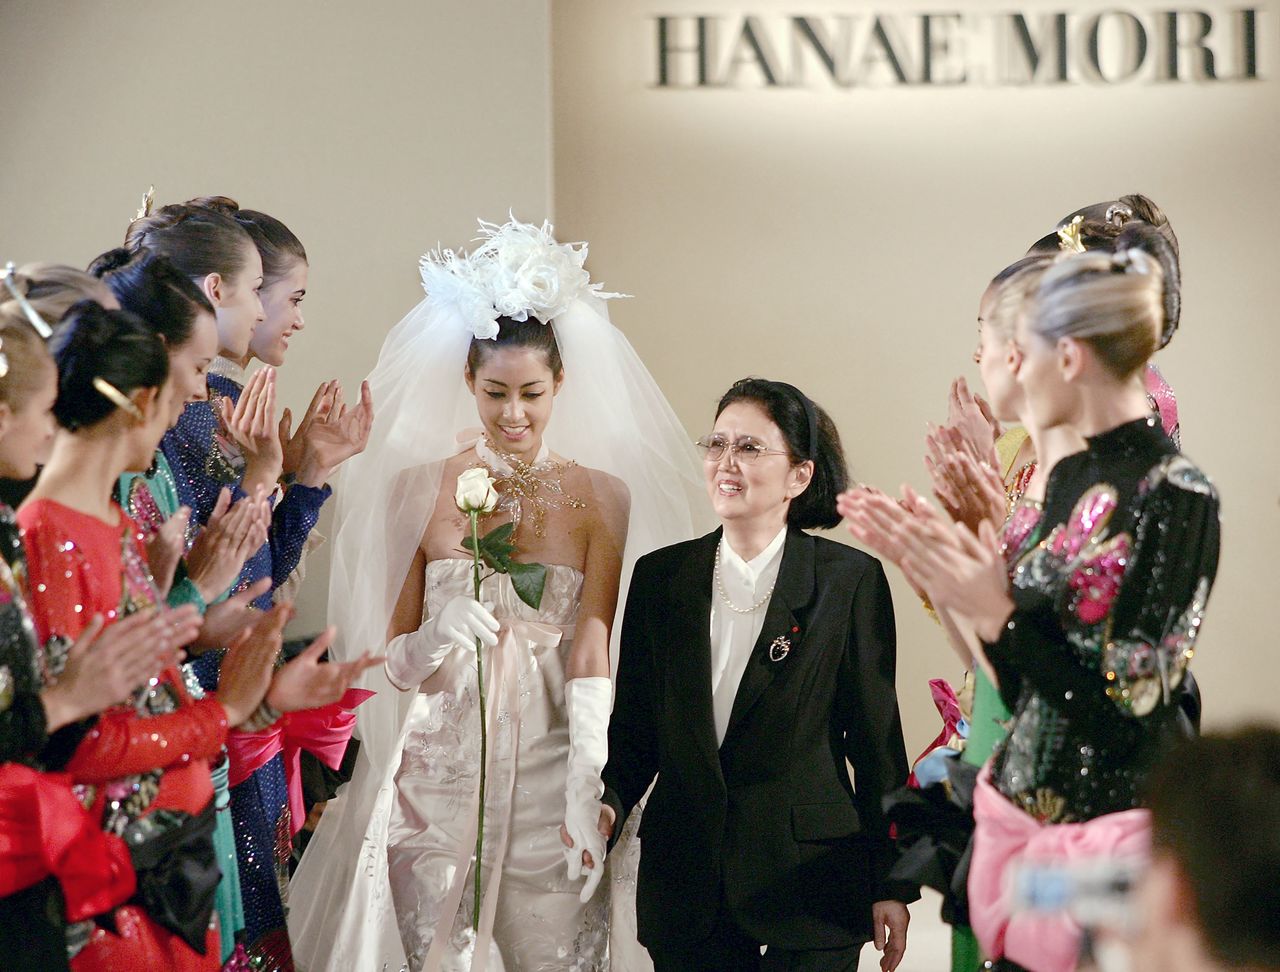 Mori Hanae (center right) holding the hand of her granddaughter Mori Izumi at a show for her autumn/winter haute couture collection in Paris on July 7, 2004. (© AFP/Jiji)